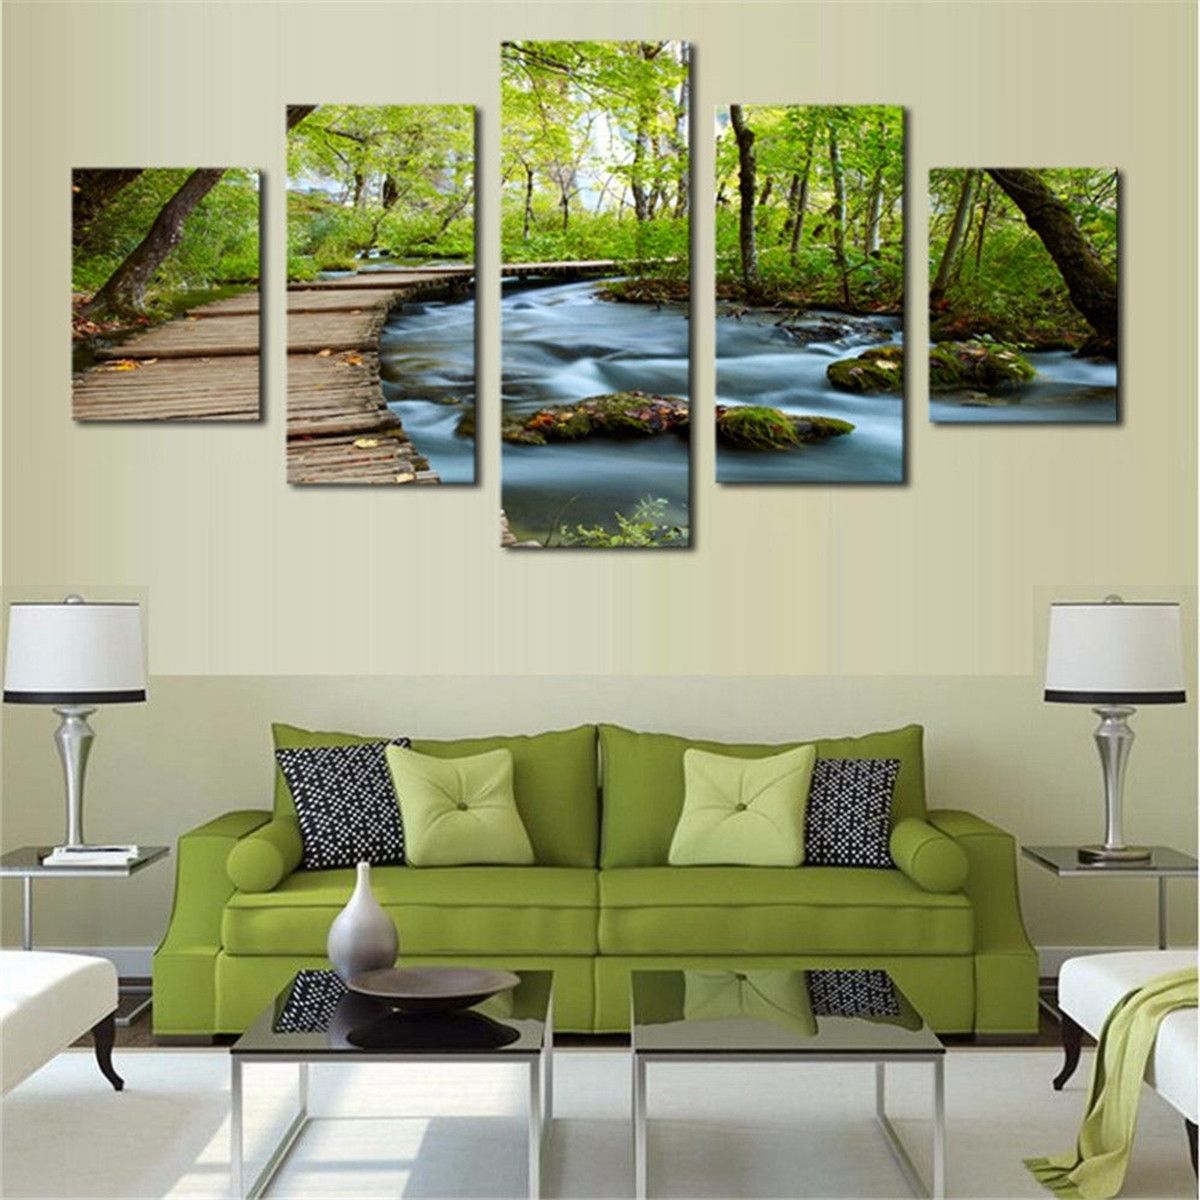 5pcs Modern Canvas Print Painting Nature Picture Wall Art Home Decor In Newest Nature Wall Art (View 13 of 20)